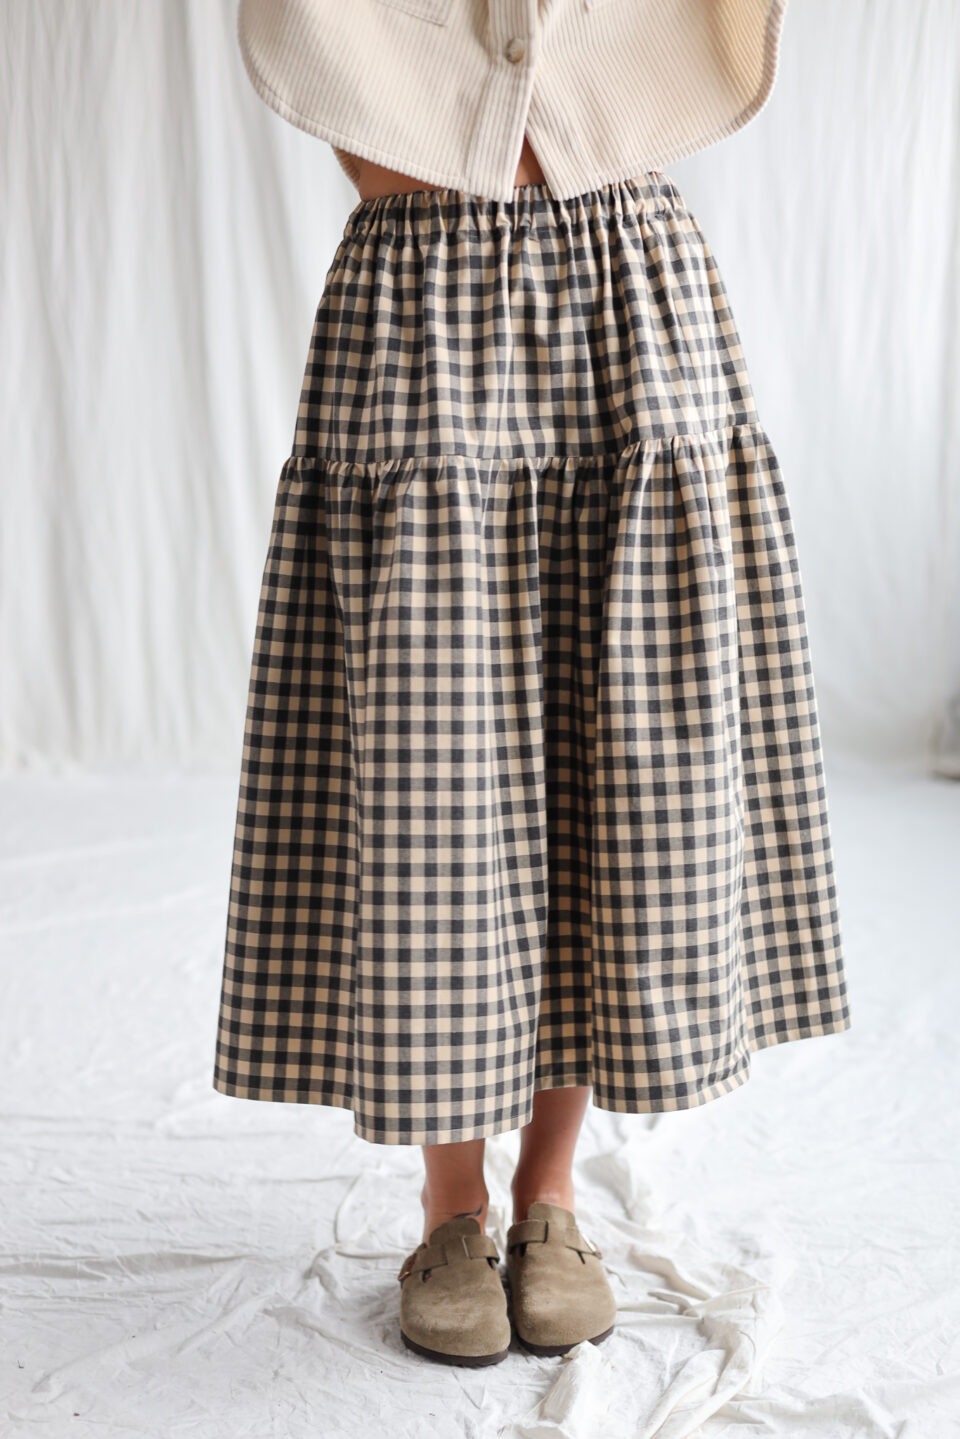 Gingham organic cotton tiered skirt with elasticated waist | Skirt | Sustainable clothing | OffOn clothing